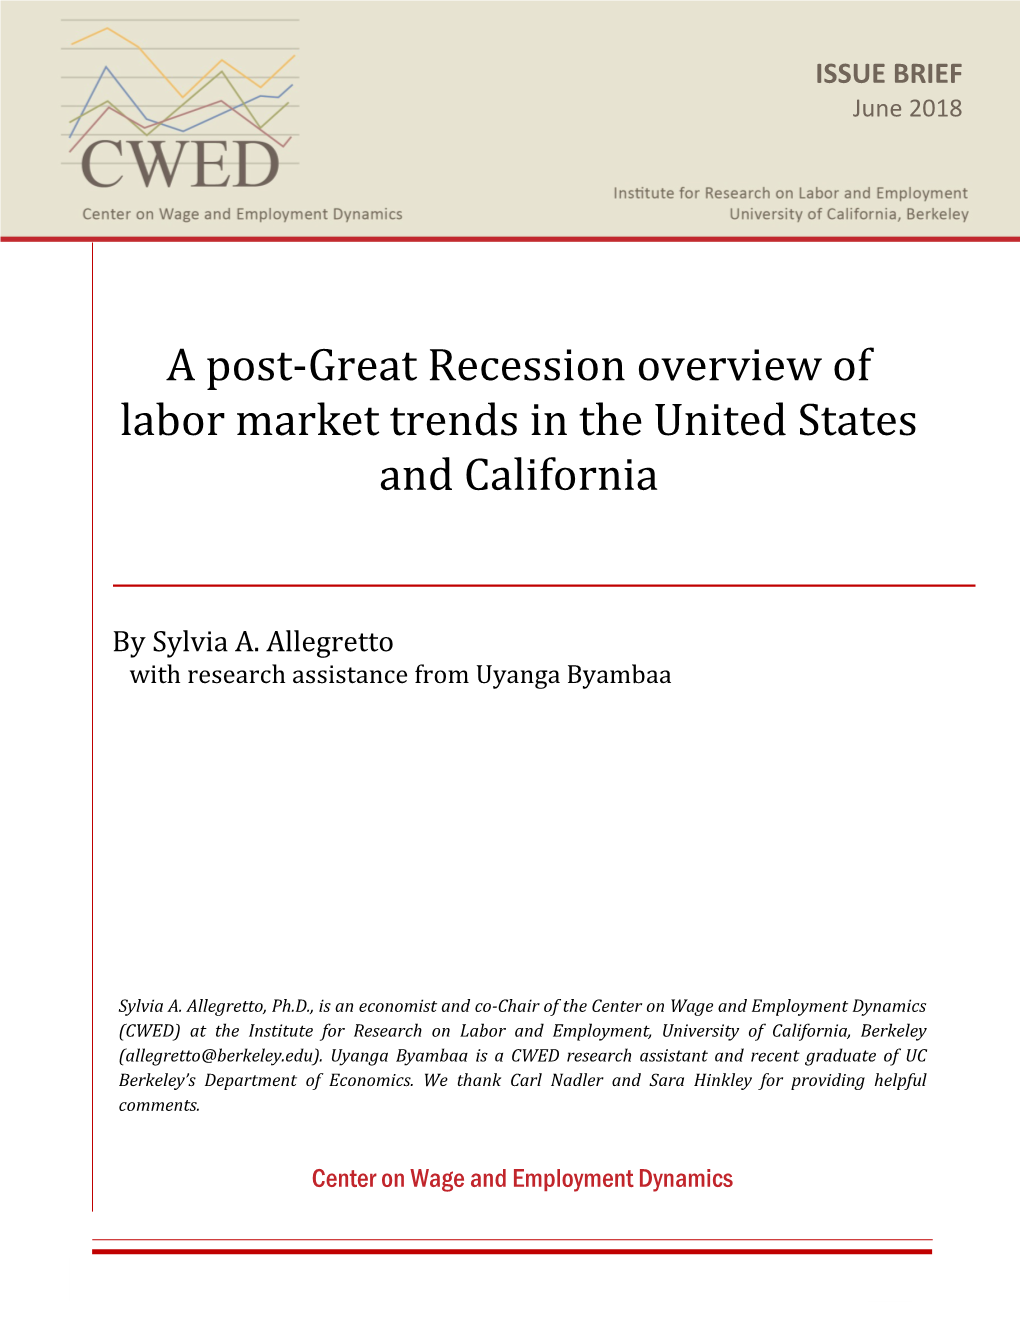 A Post-Great Recession Overview of Labor Market Trends in the Unites